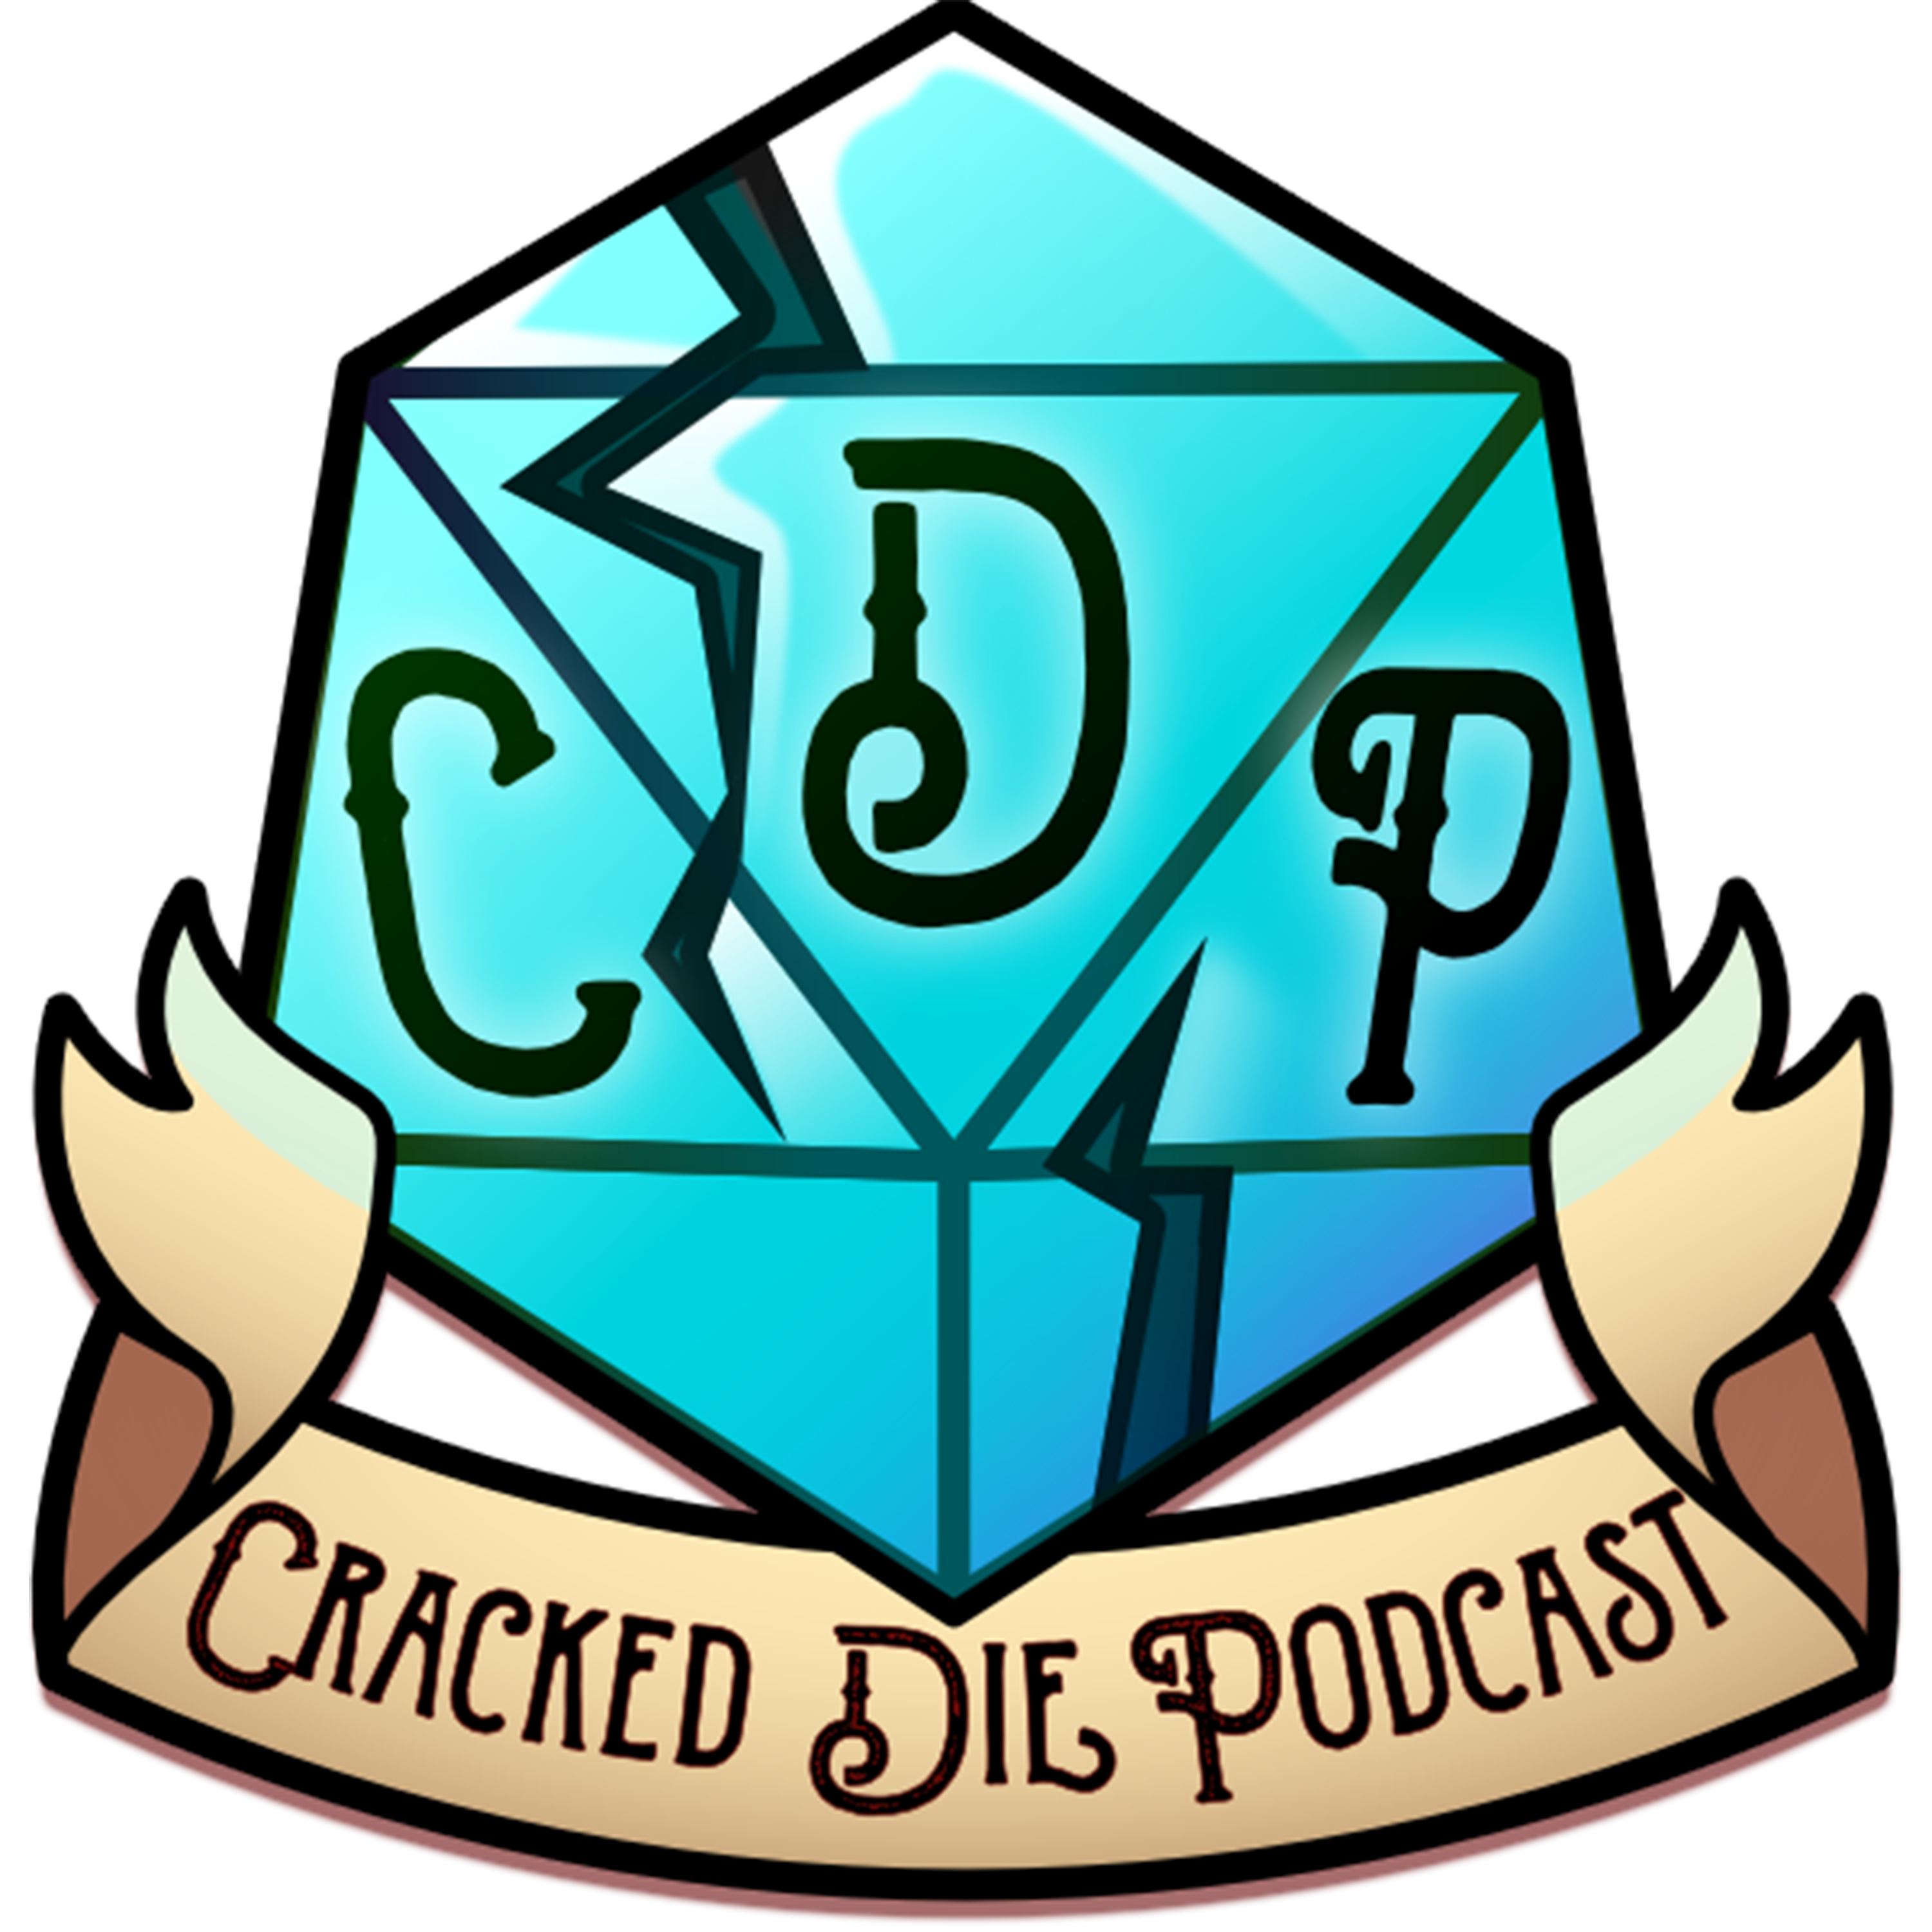 The Cracked Die Podcast - Episode 128 - When You’re Hot, You’re Hot